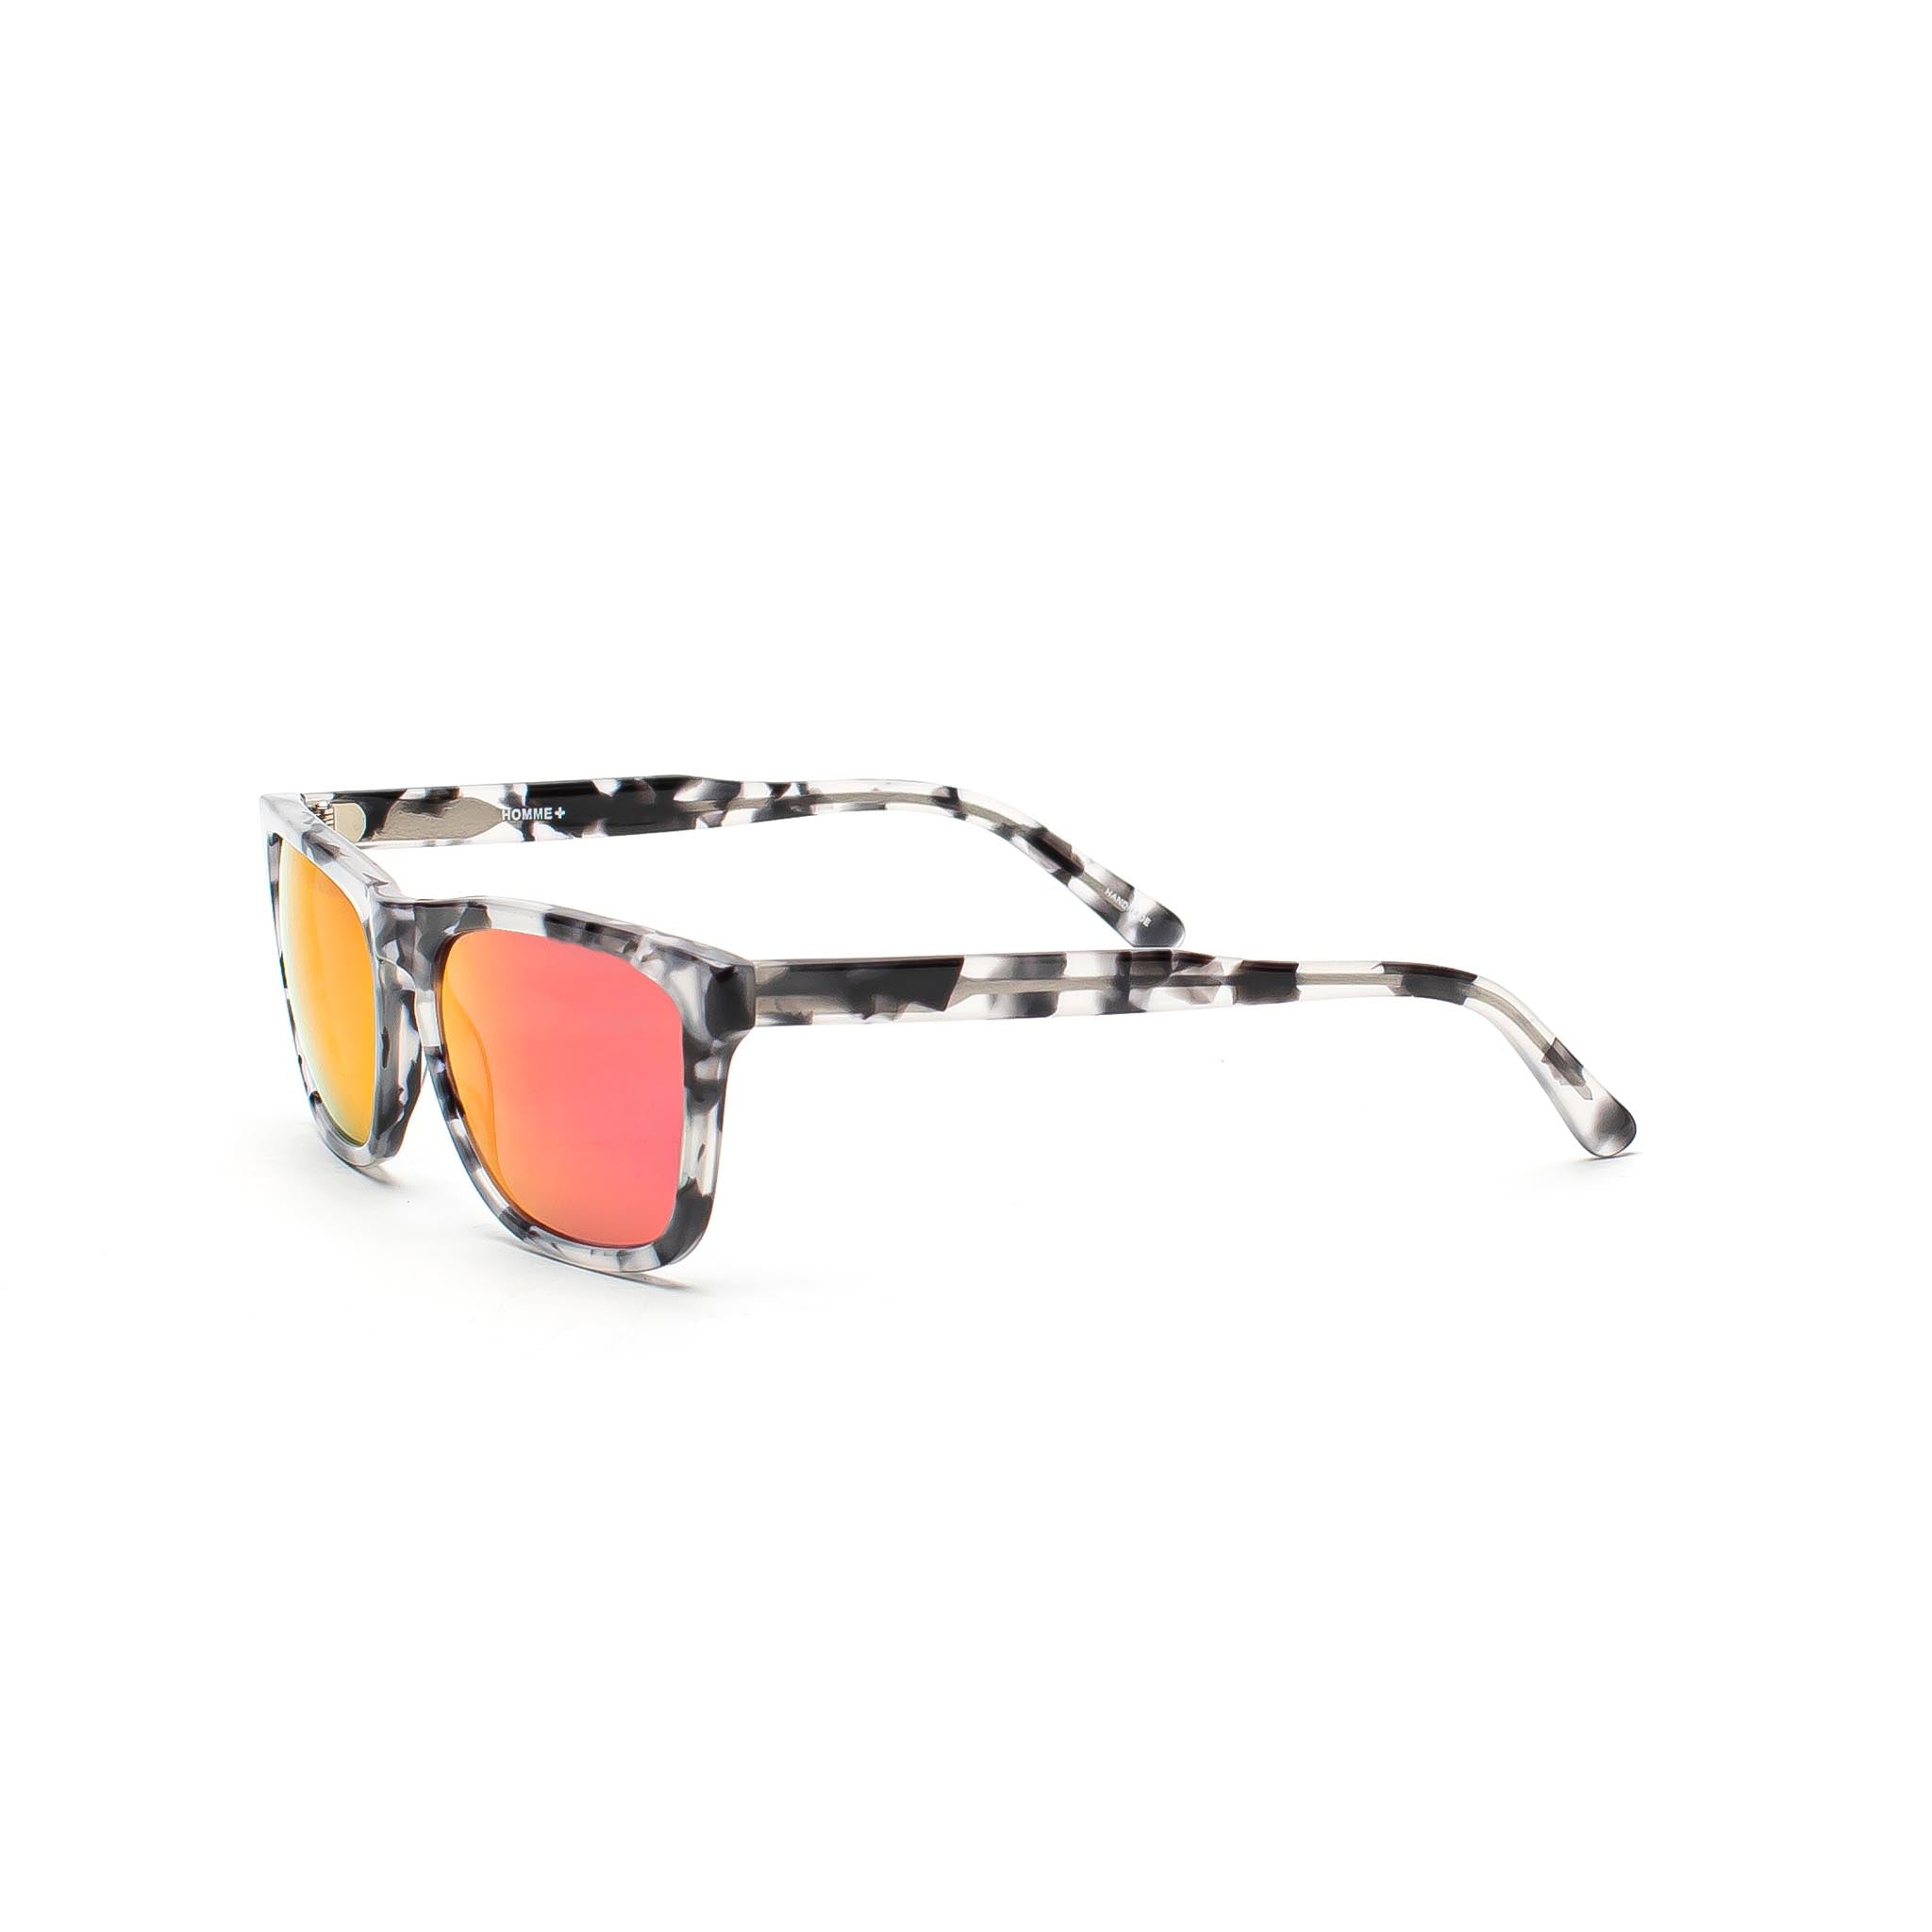 HOMME+ HP011 Sunglasses Red Lens